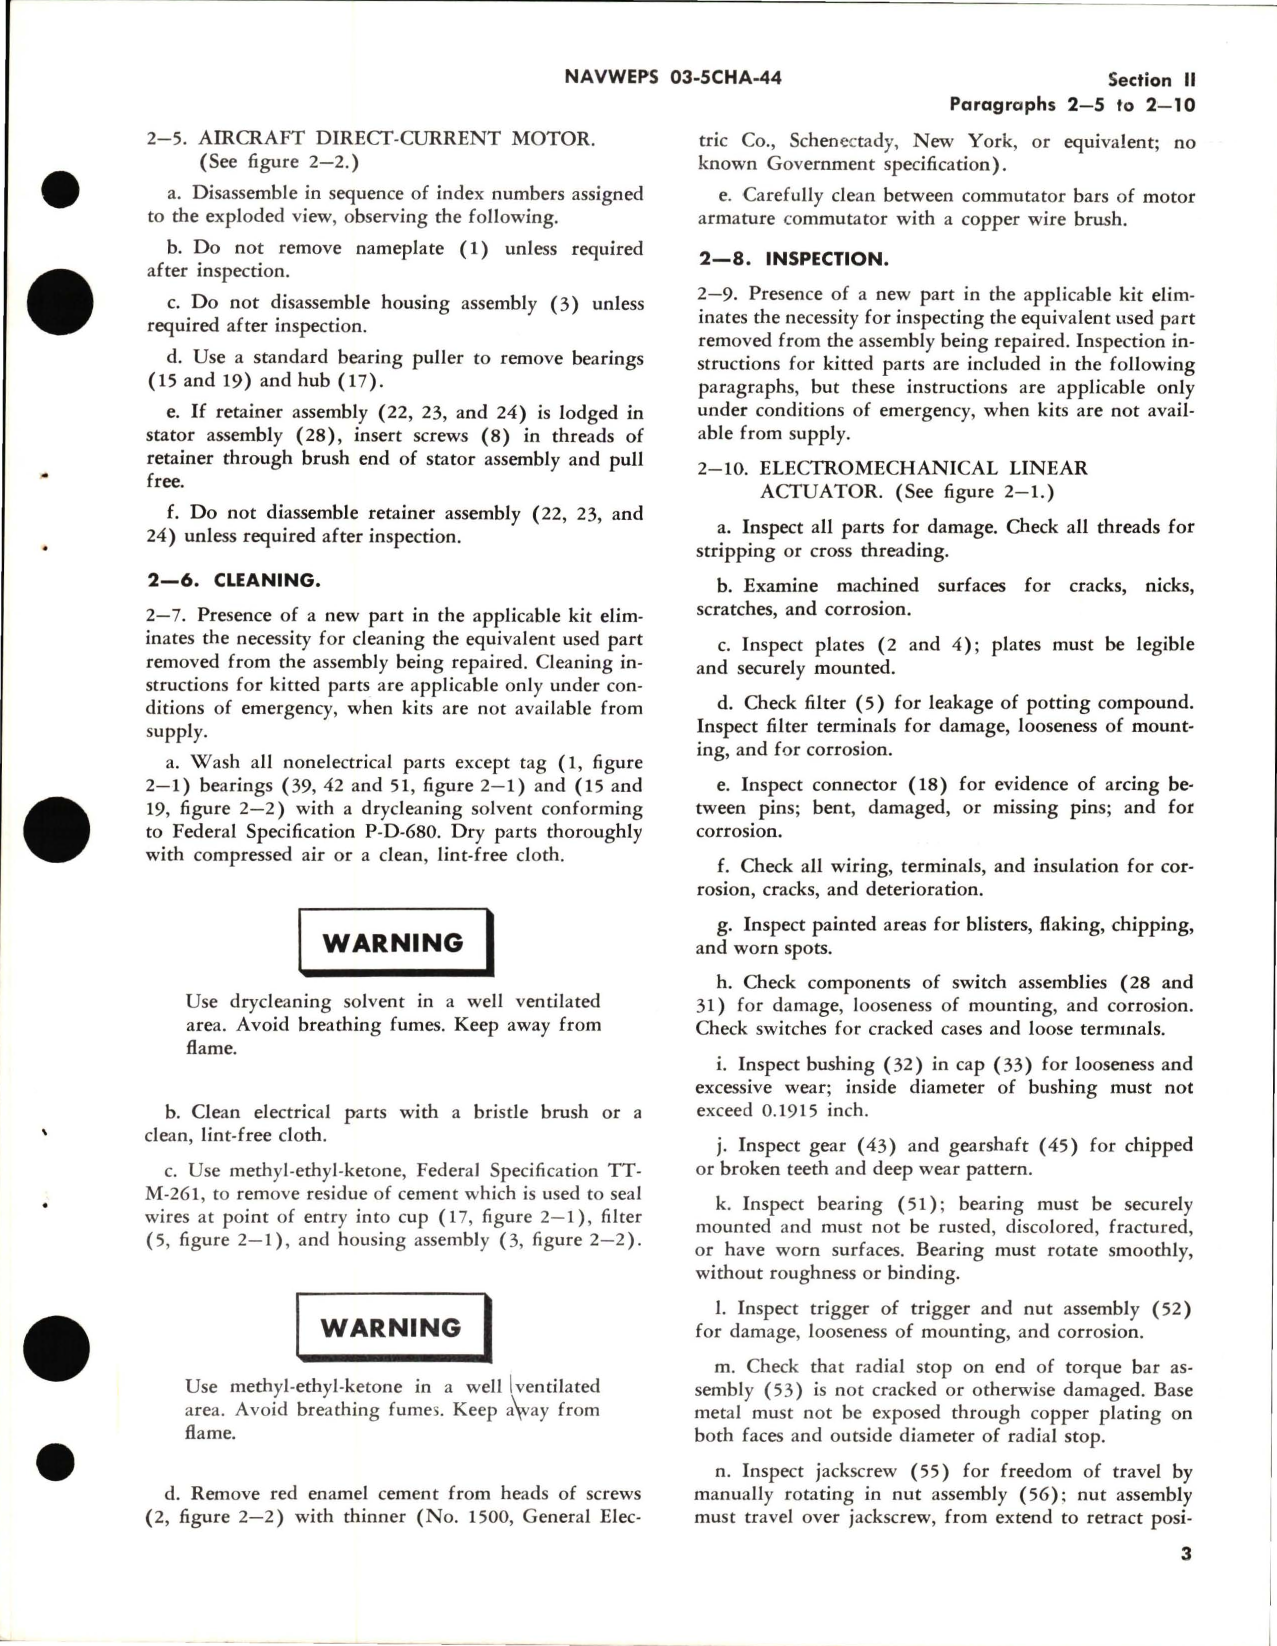 Sample page 7 from AirCorps Library document: Overhaul Instructions for Electromechanical Linear Actuator - Part 525520-1 and 48229